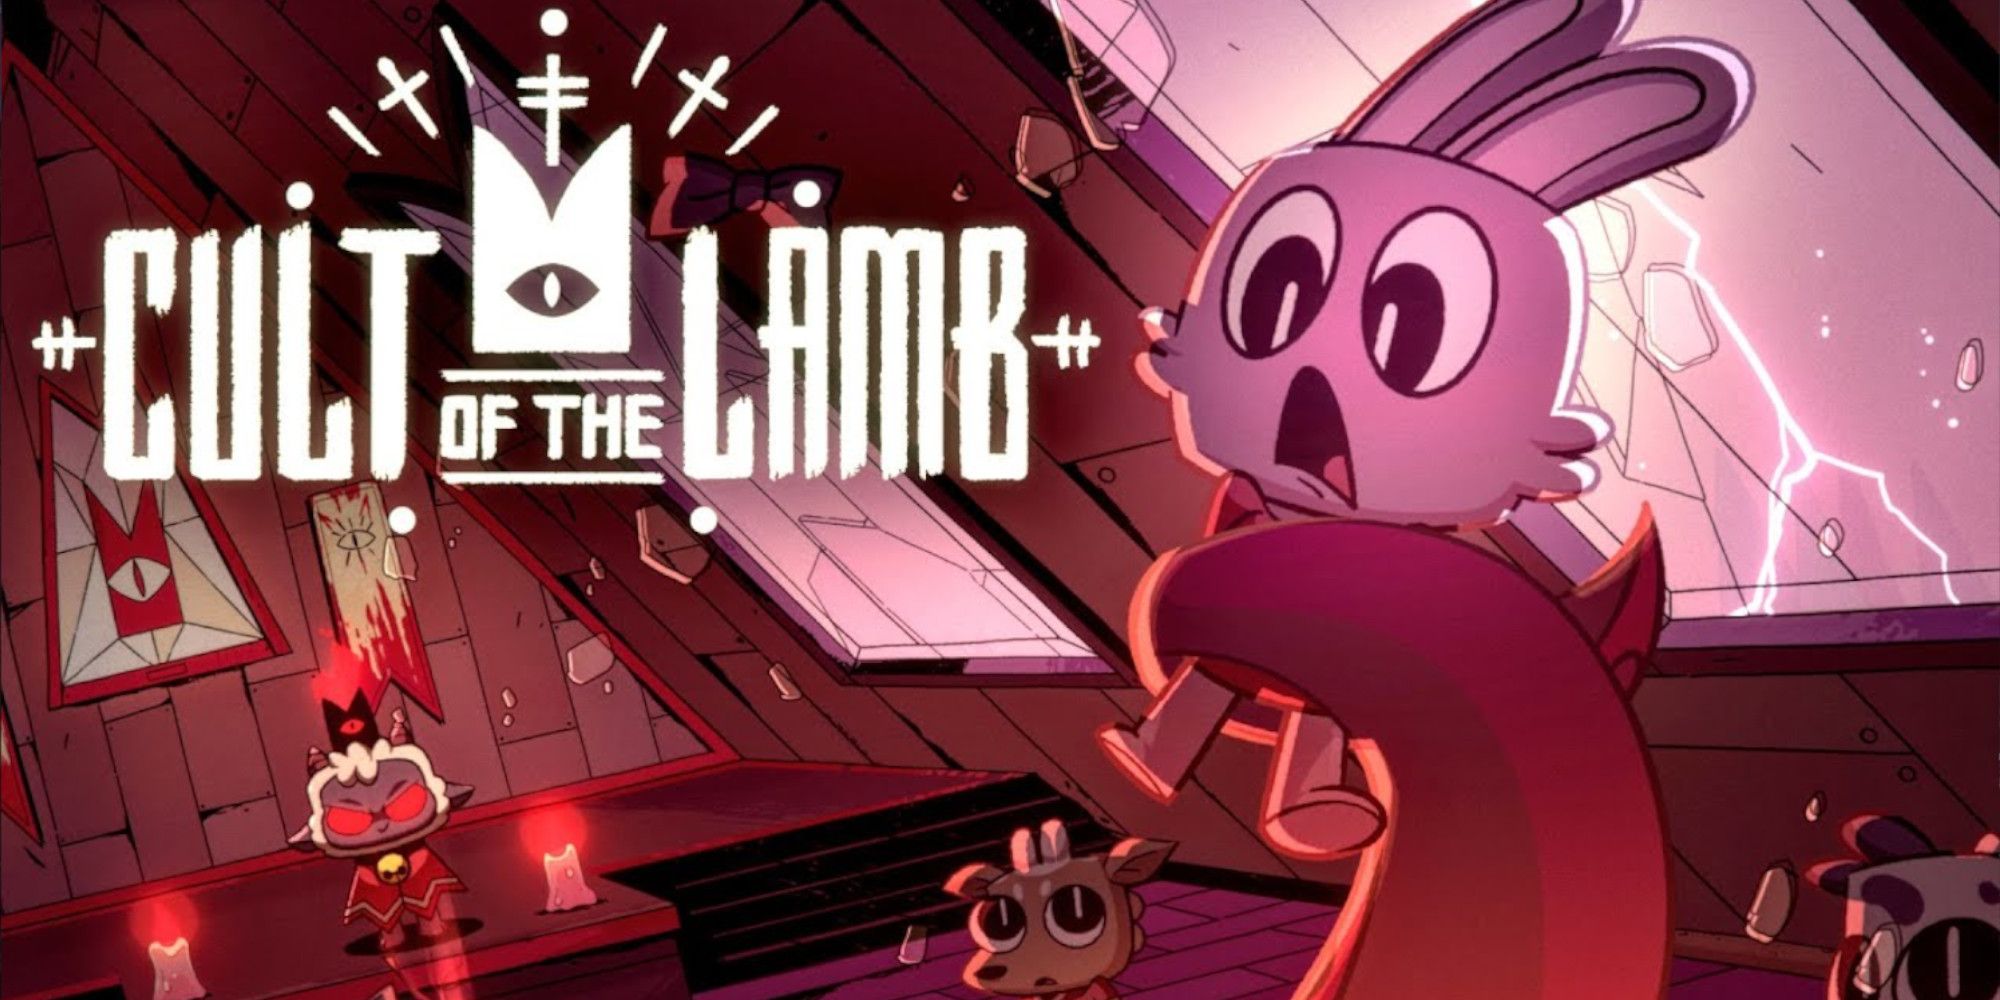 Devolver's Cult of the Lamb is an action game with sinister base building